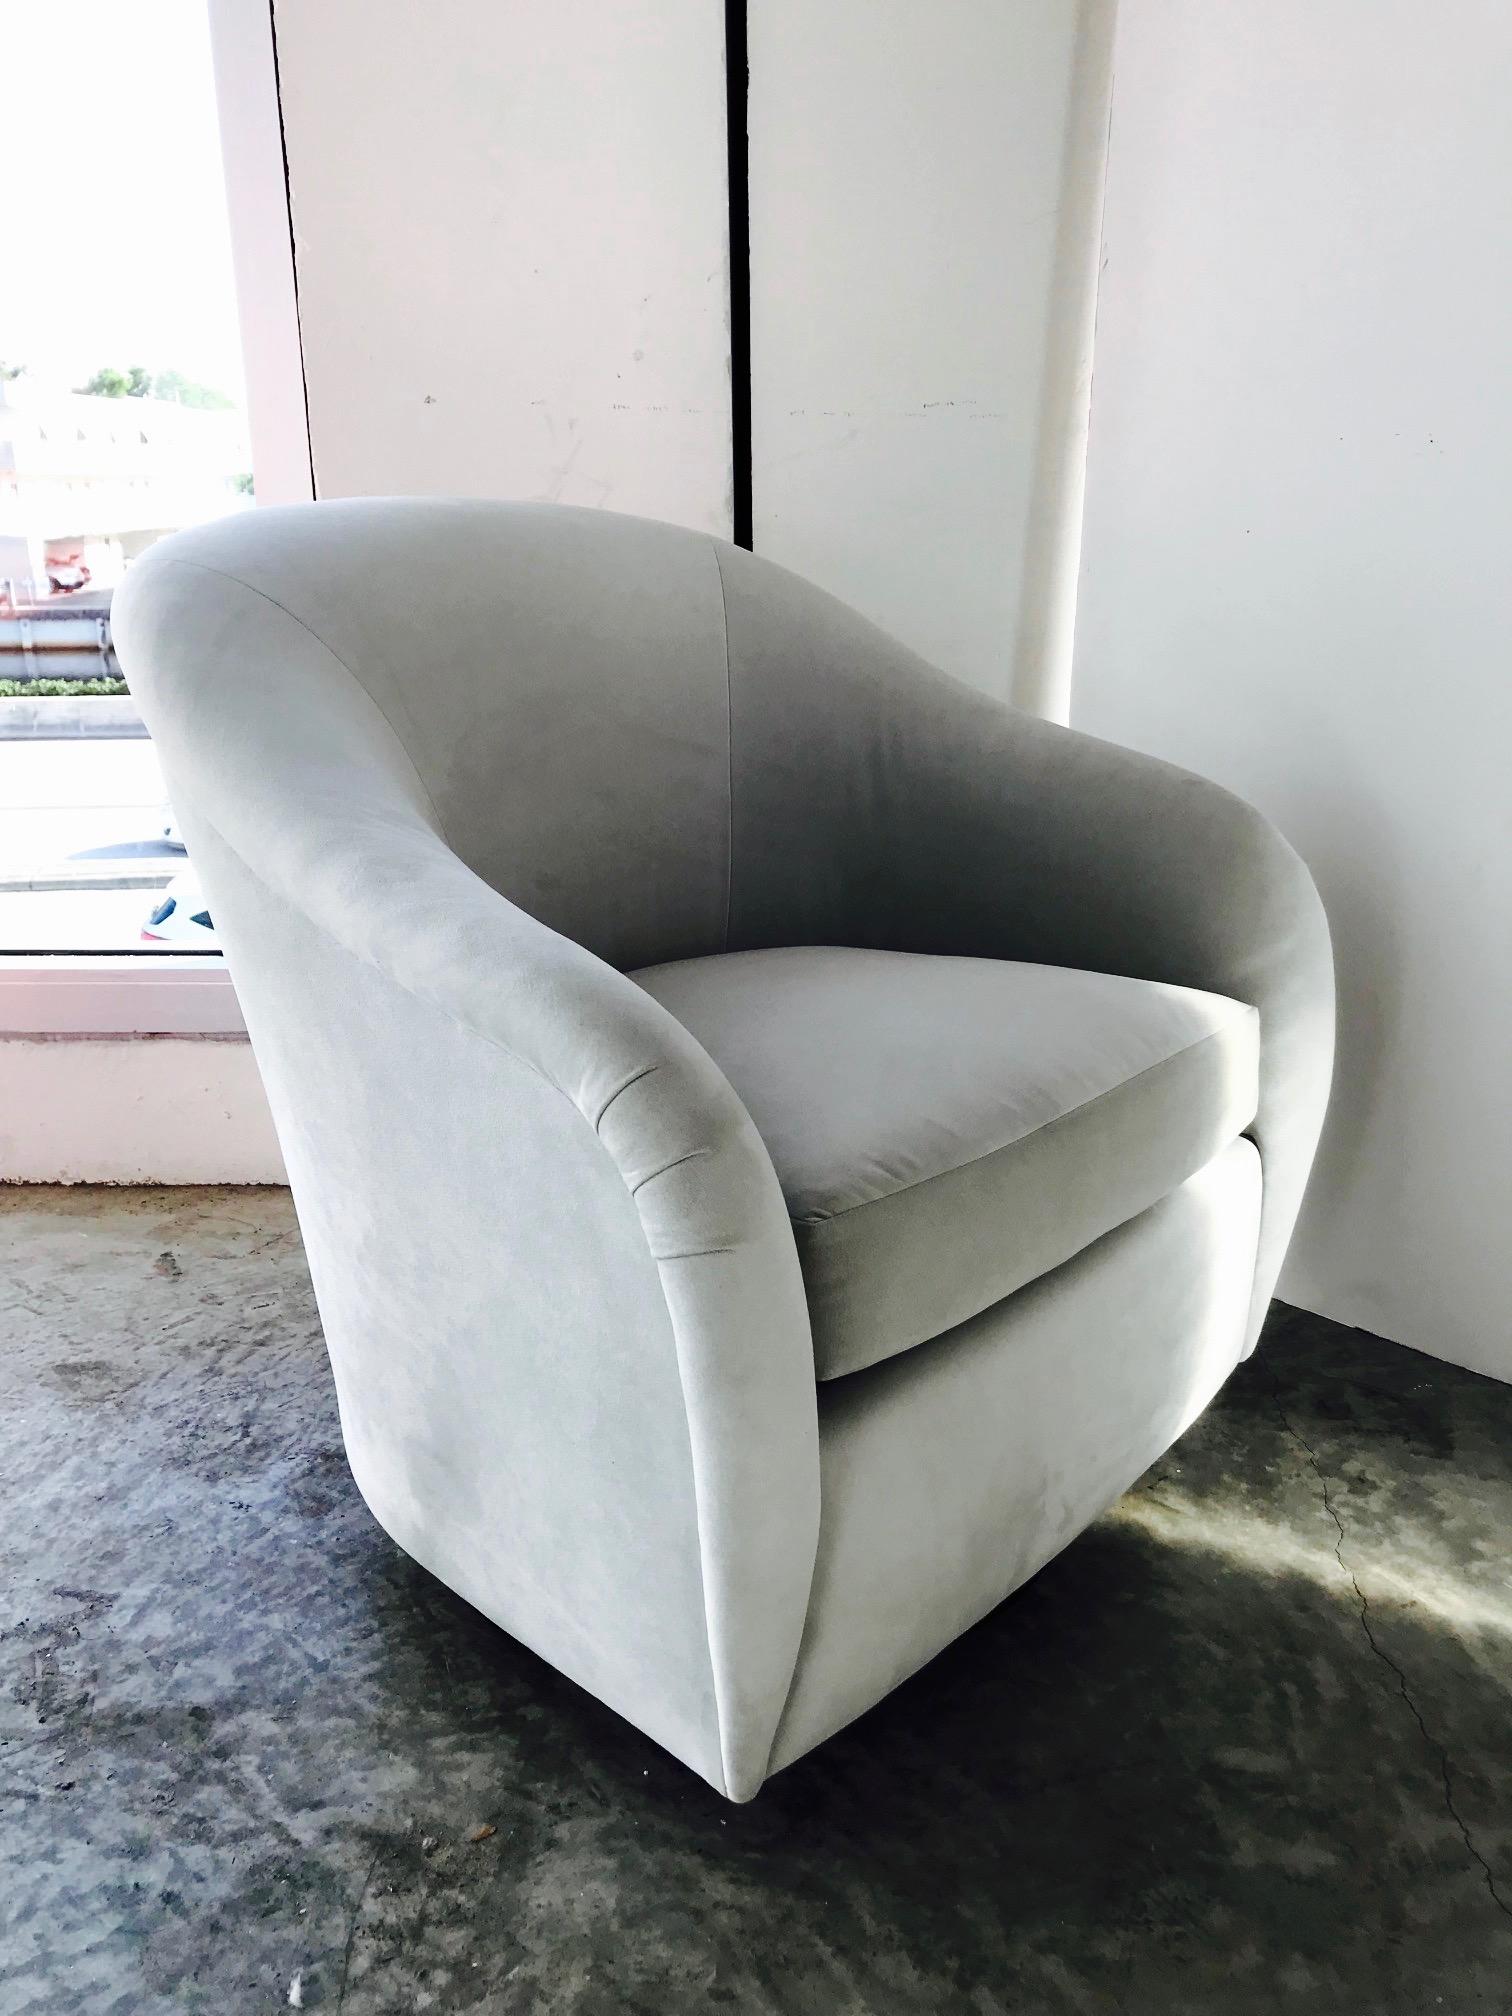 Gorgeous Mid-Century Modern lounge chair with swivel base design. Chair has barrel back form with elegant curved and tapered sides. Newly upholstered in light grey suede, or possibly fine grade microsuede, with reversible zippered seat cushion and